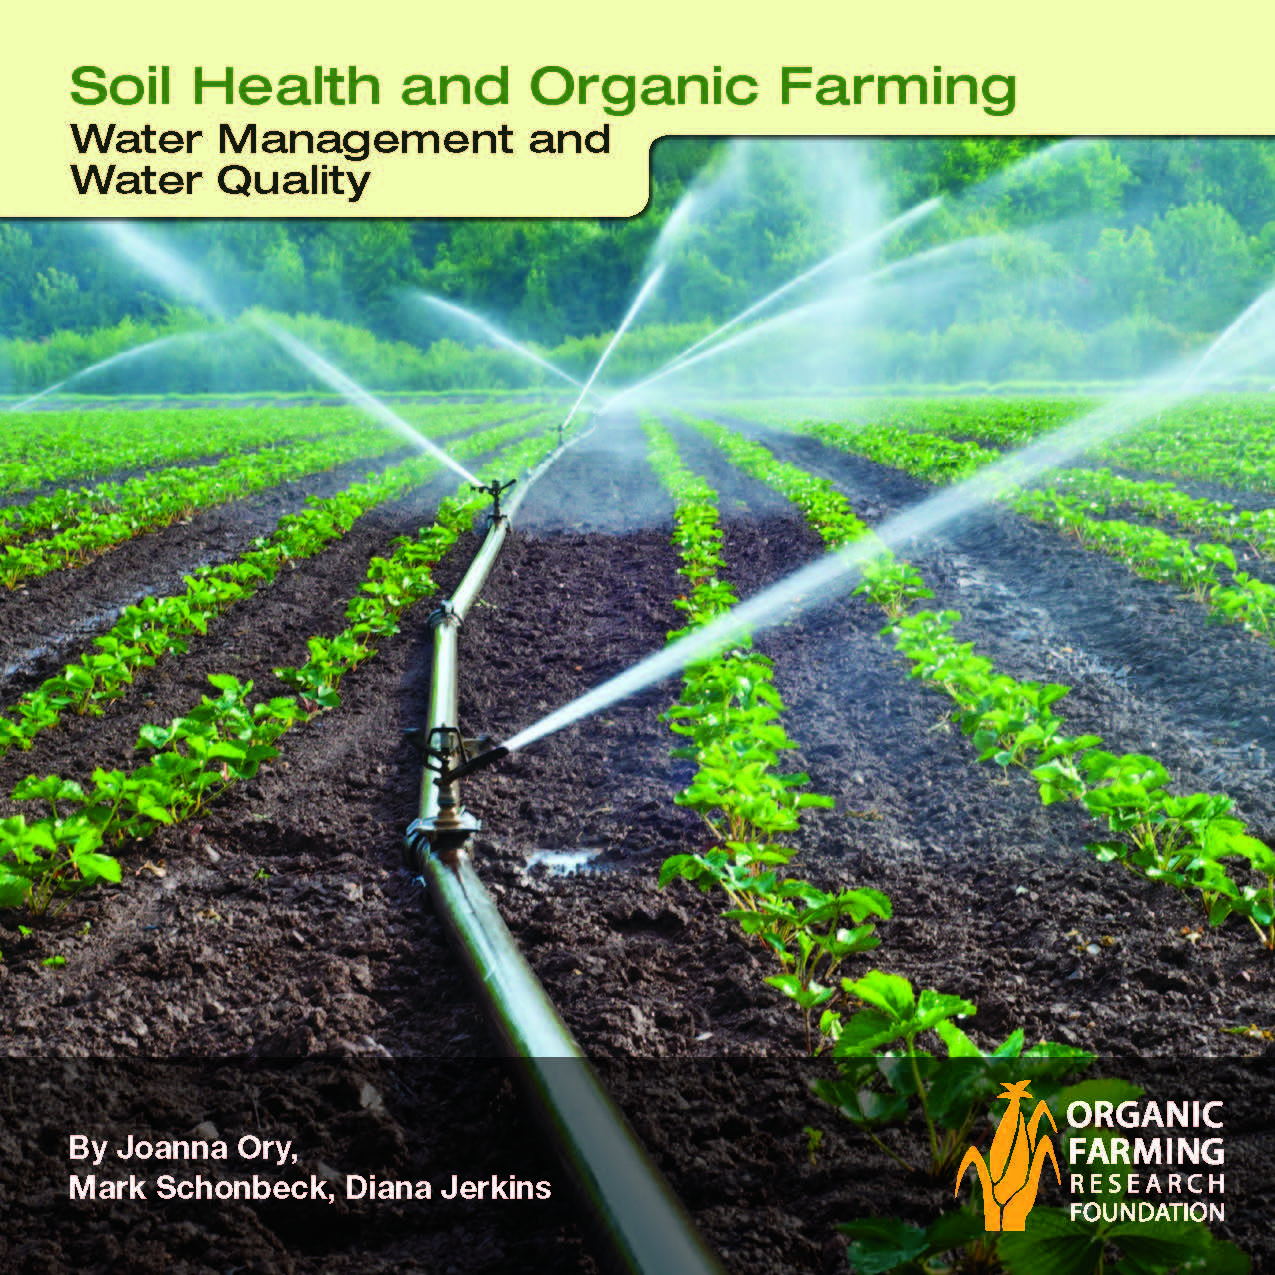 OFRF-Soil Health and Organic Farming-Water Management and Water Quality